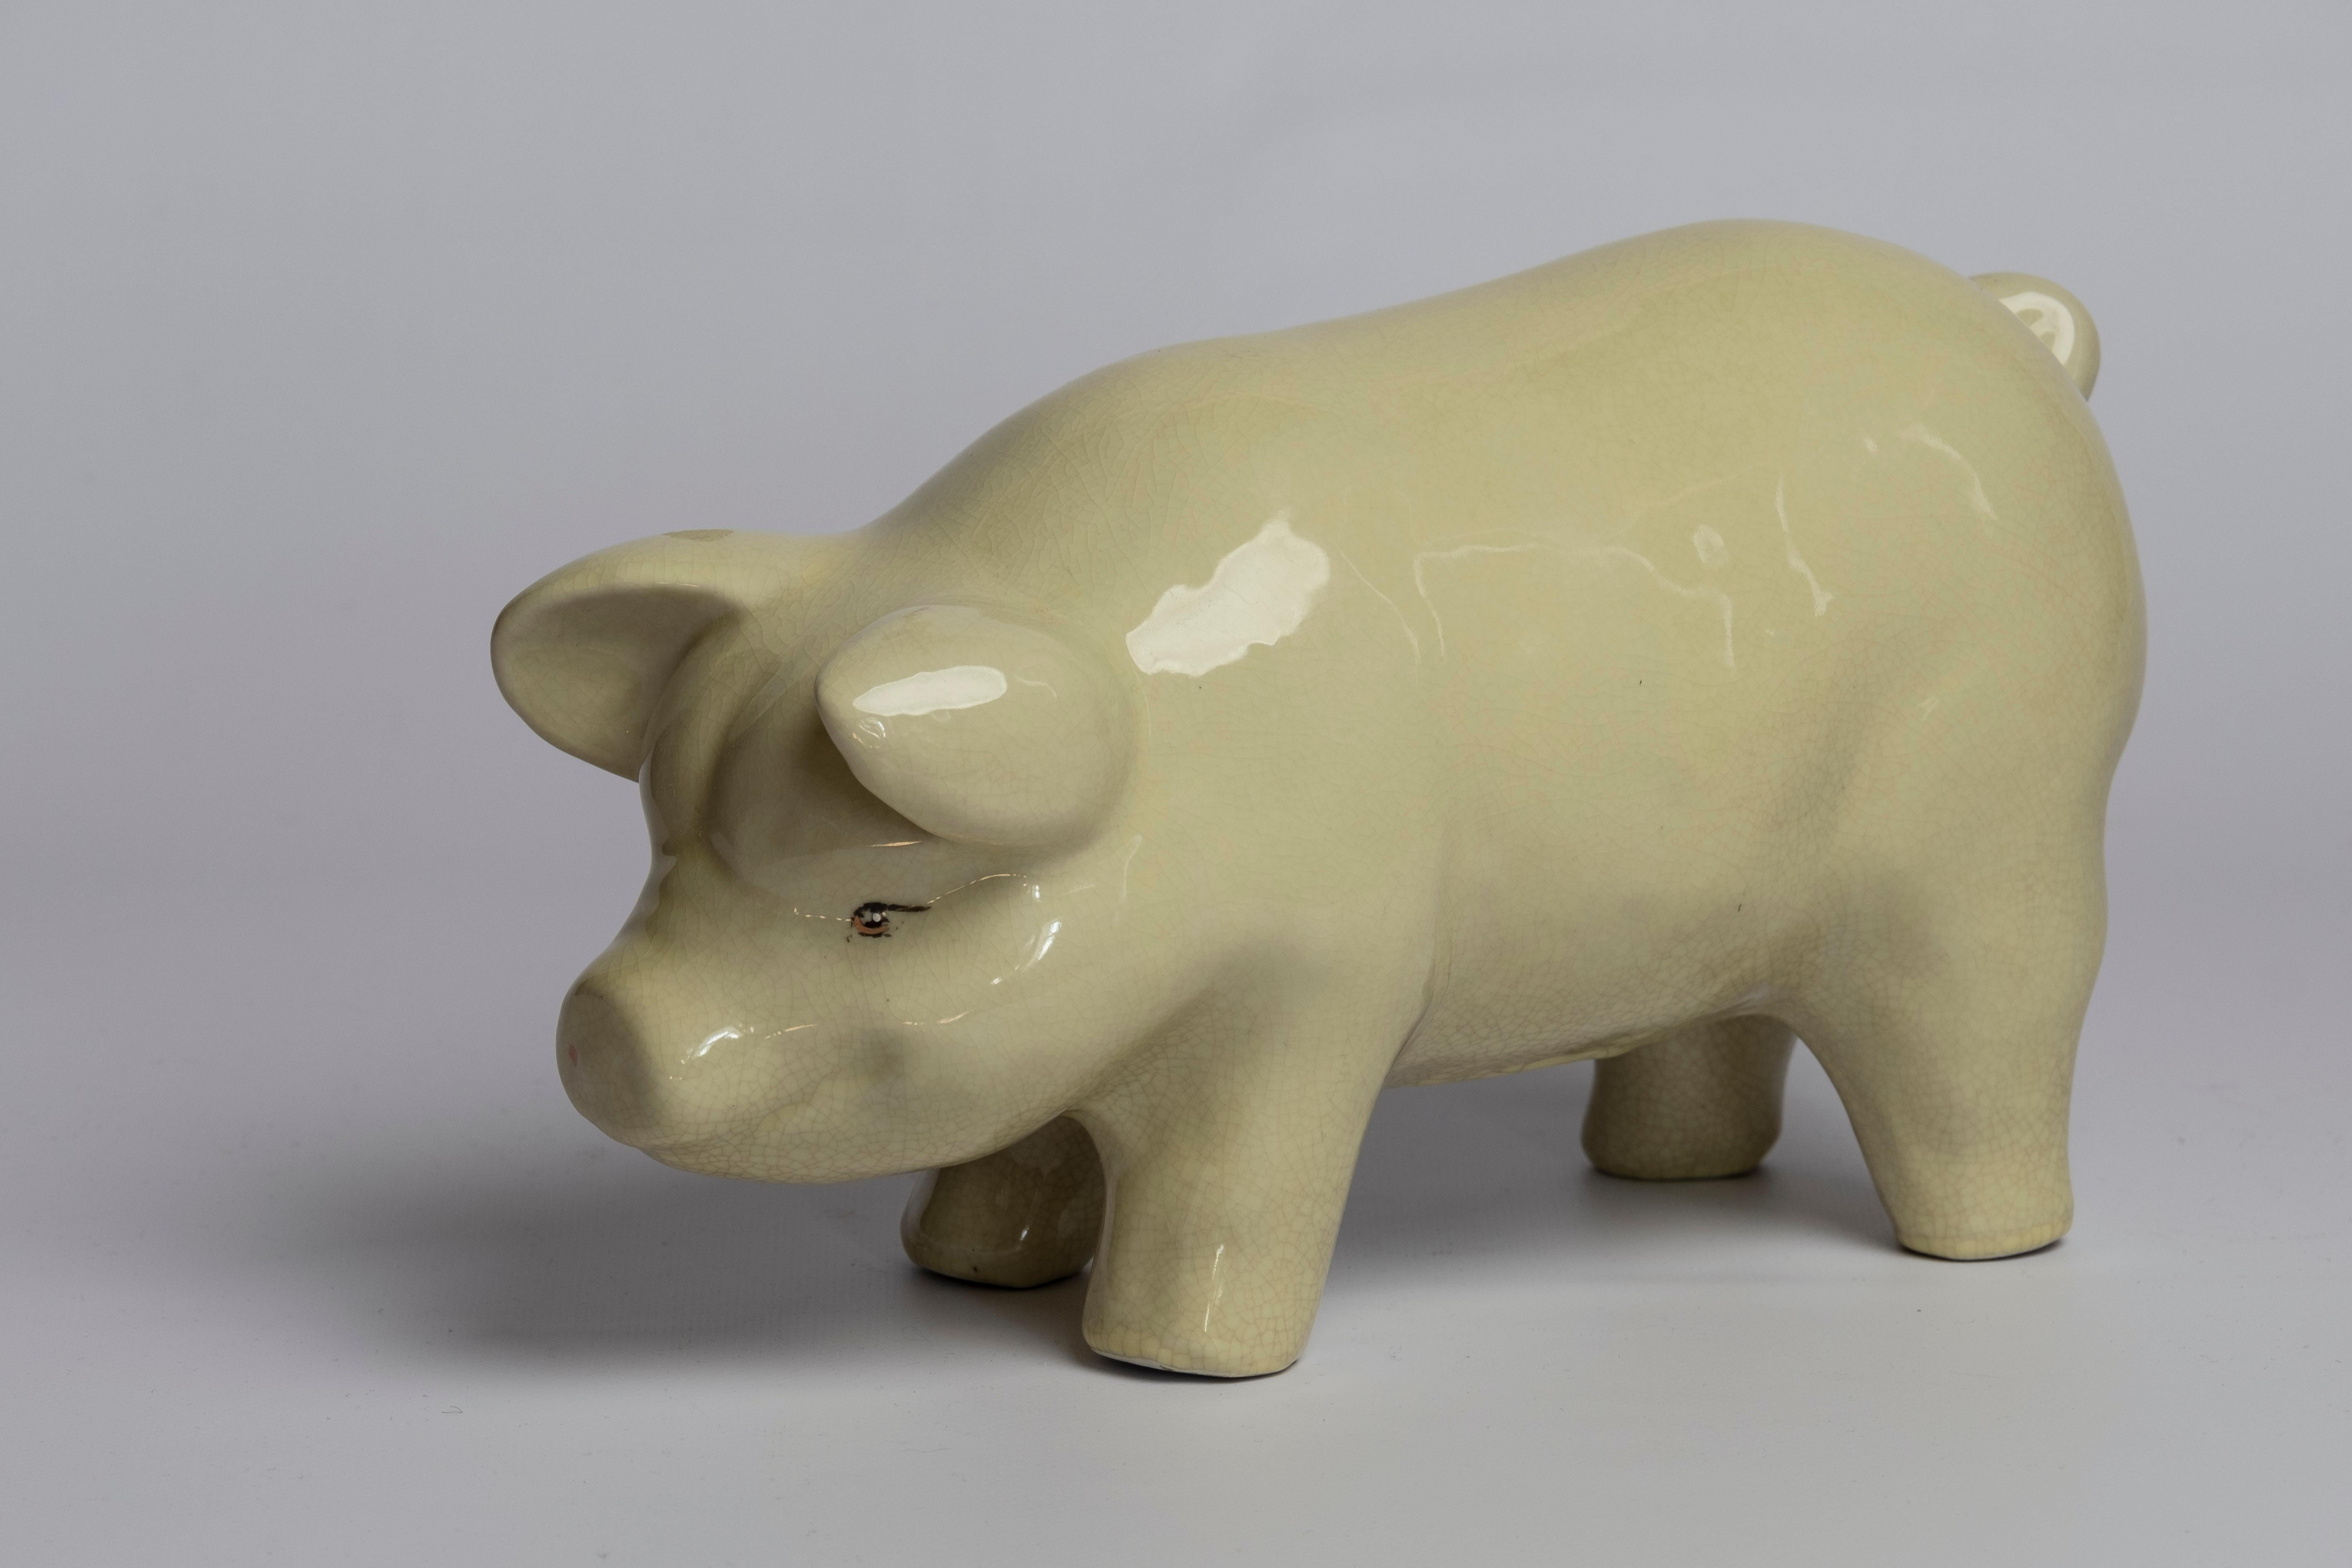 Early 20th century porcelain pig. Beautifully patinated and crackled creamy white glaze. Quite possibly an old piggy bank, fed through bottom since slot at the top missing.